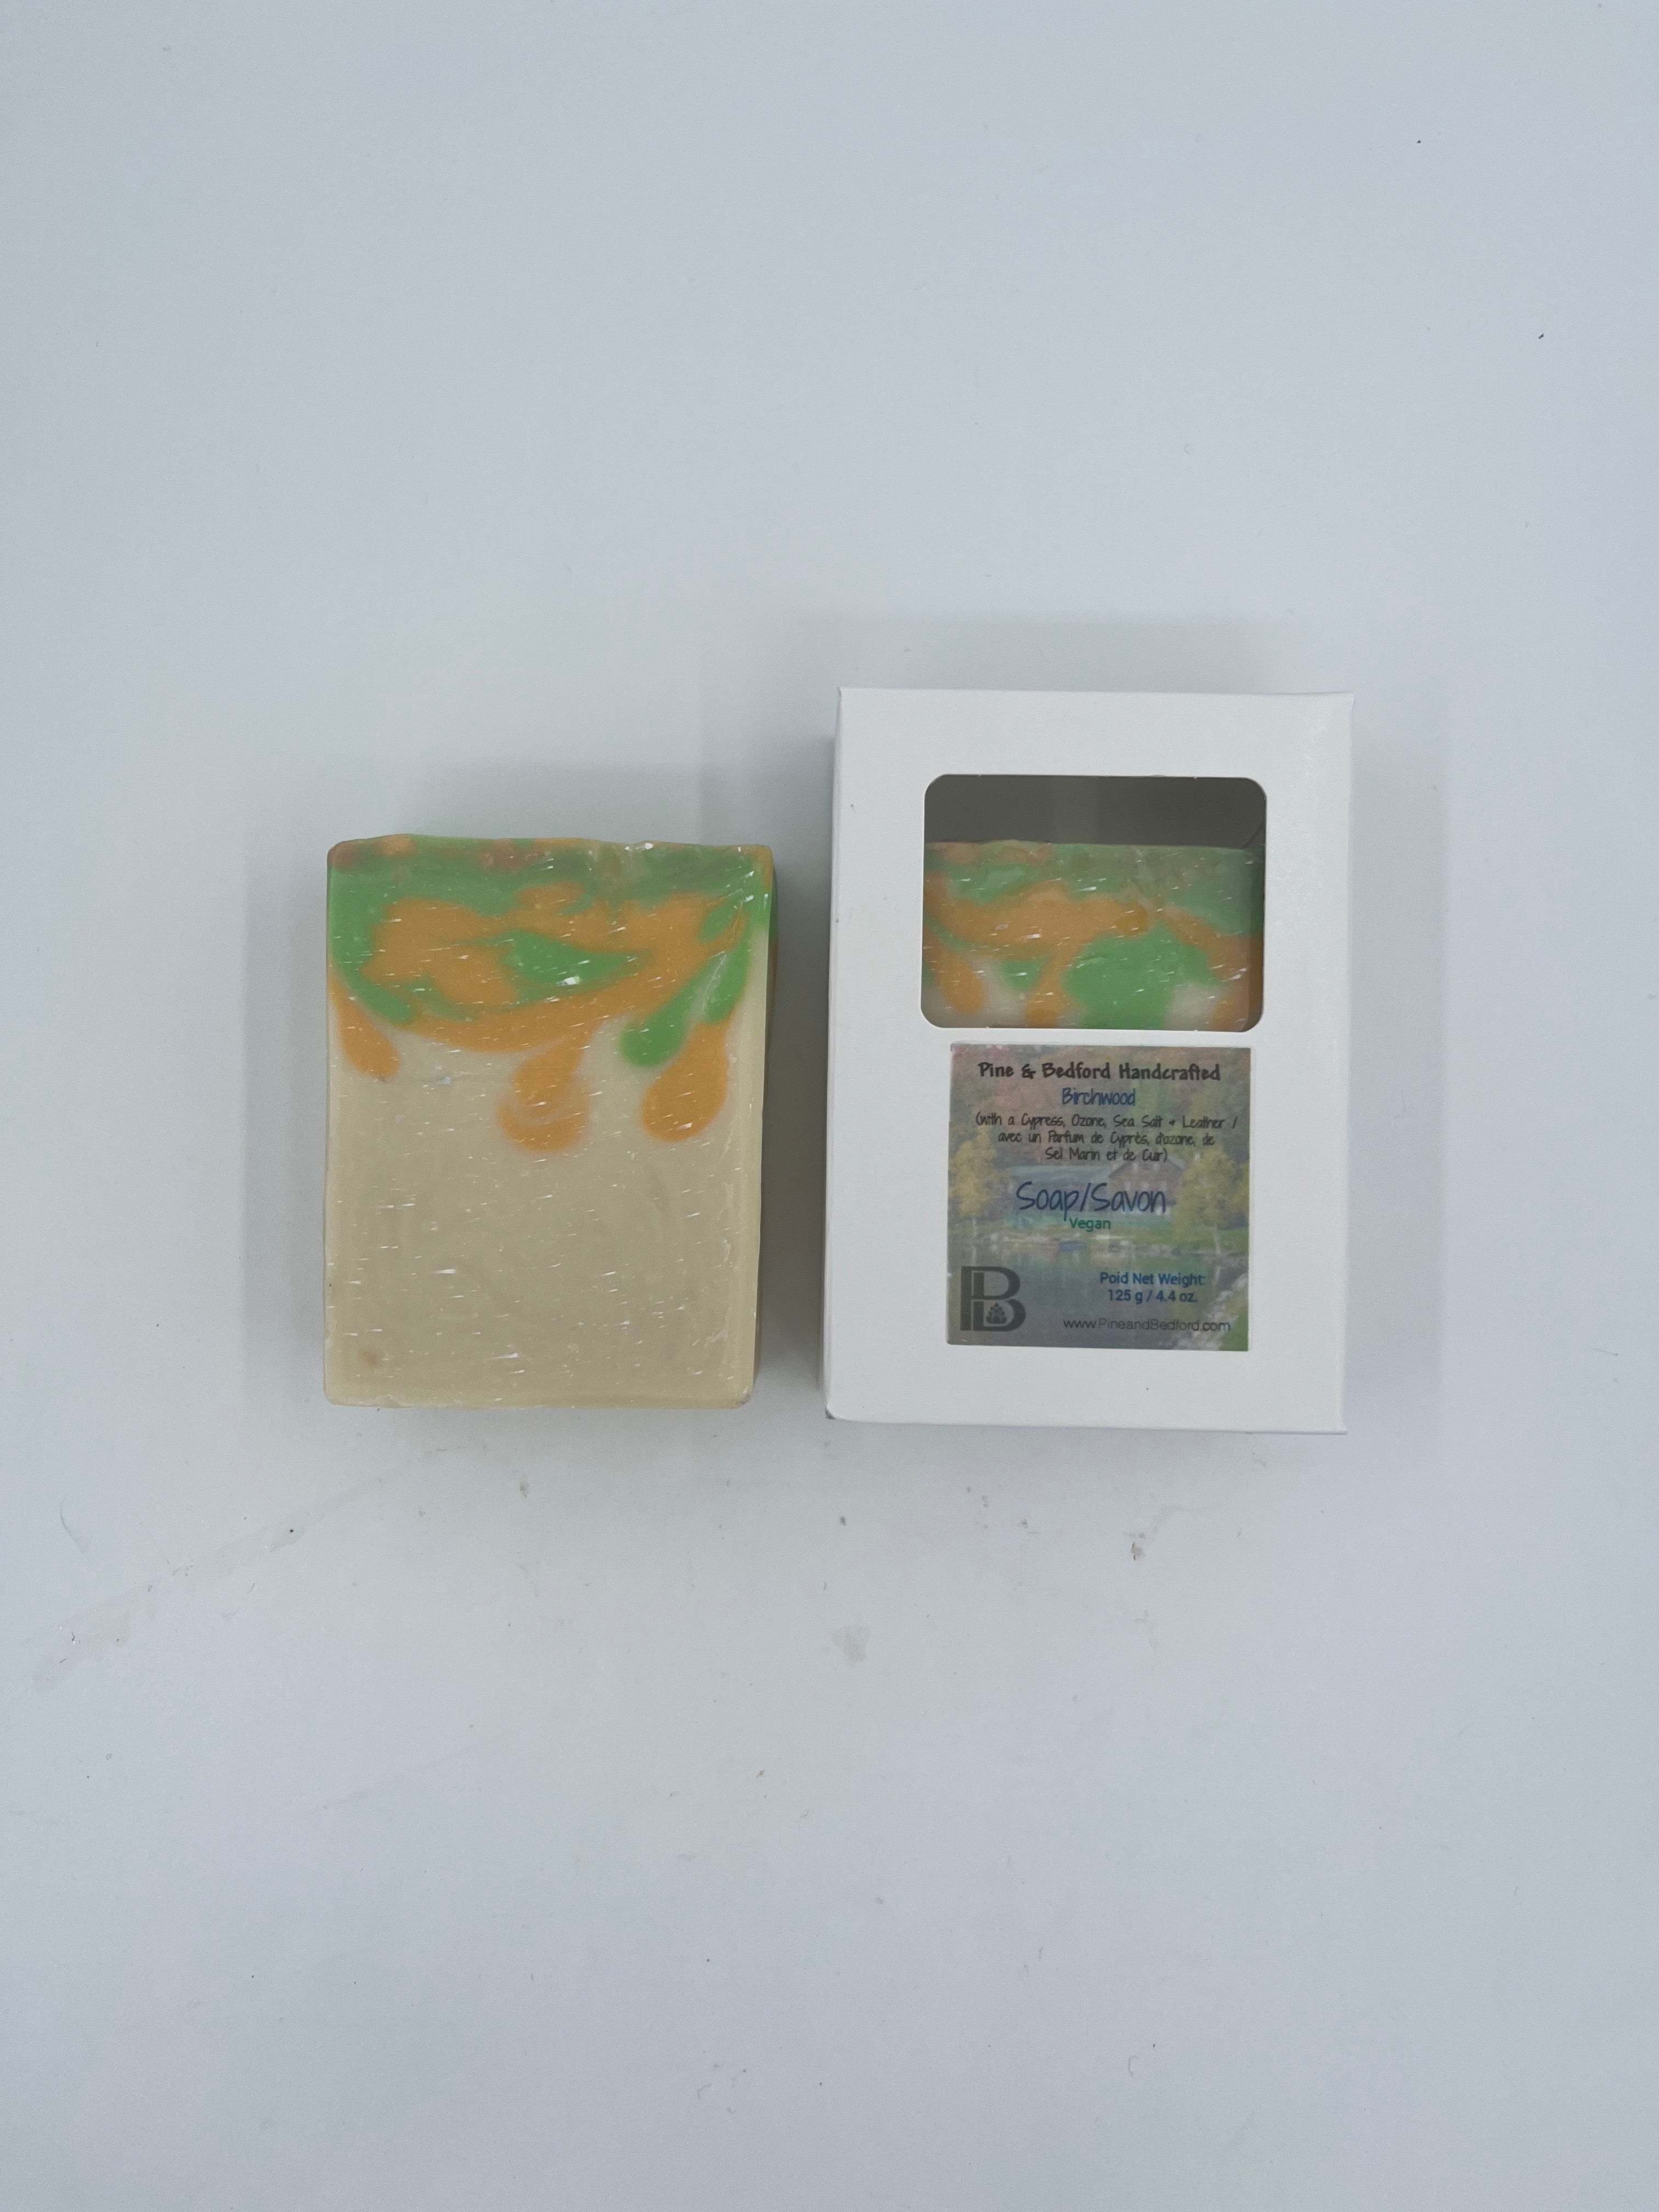 Pine and Bedford's Birchwood Soap is lightly fragranced and smells like a complex mix of wild cypress, lime, oud, and leather. With a after-shave scent this Extra Bubbles formula bar provides enough creamy bubble with which to shave. Shown here naked and boxed.